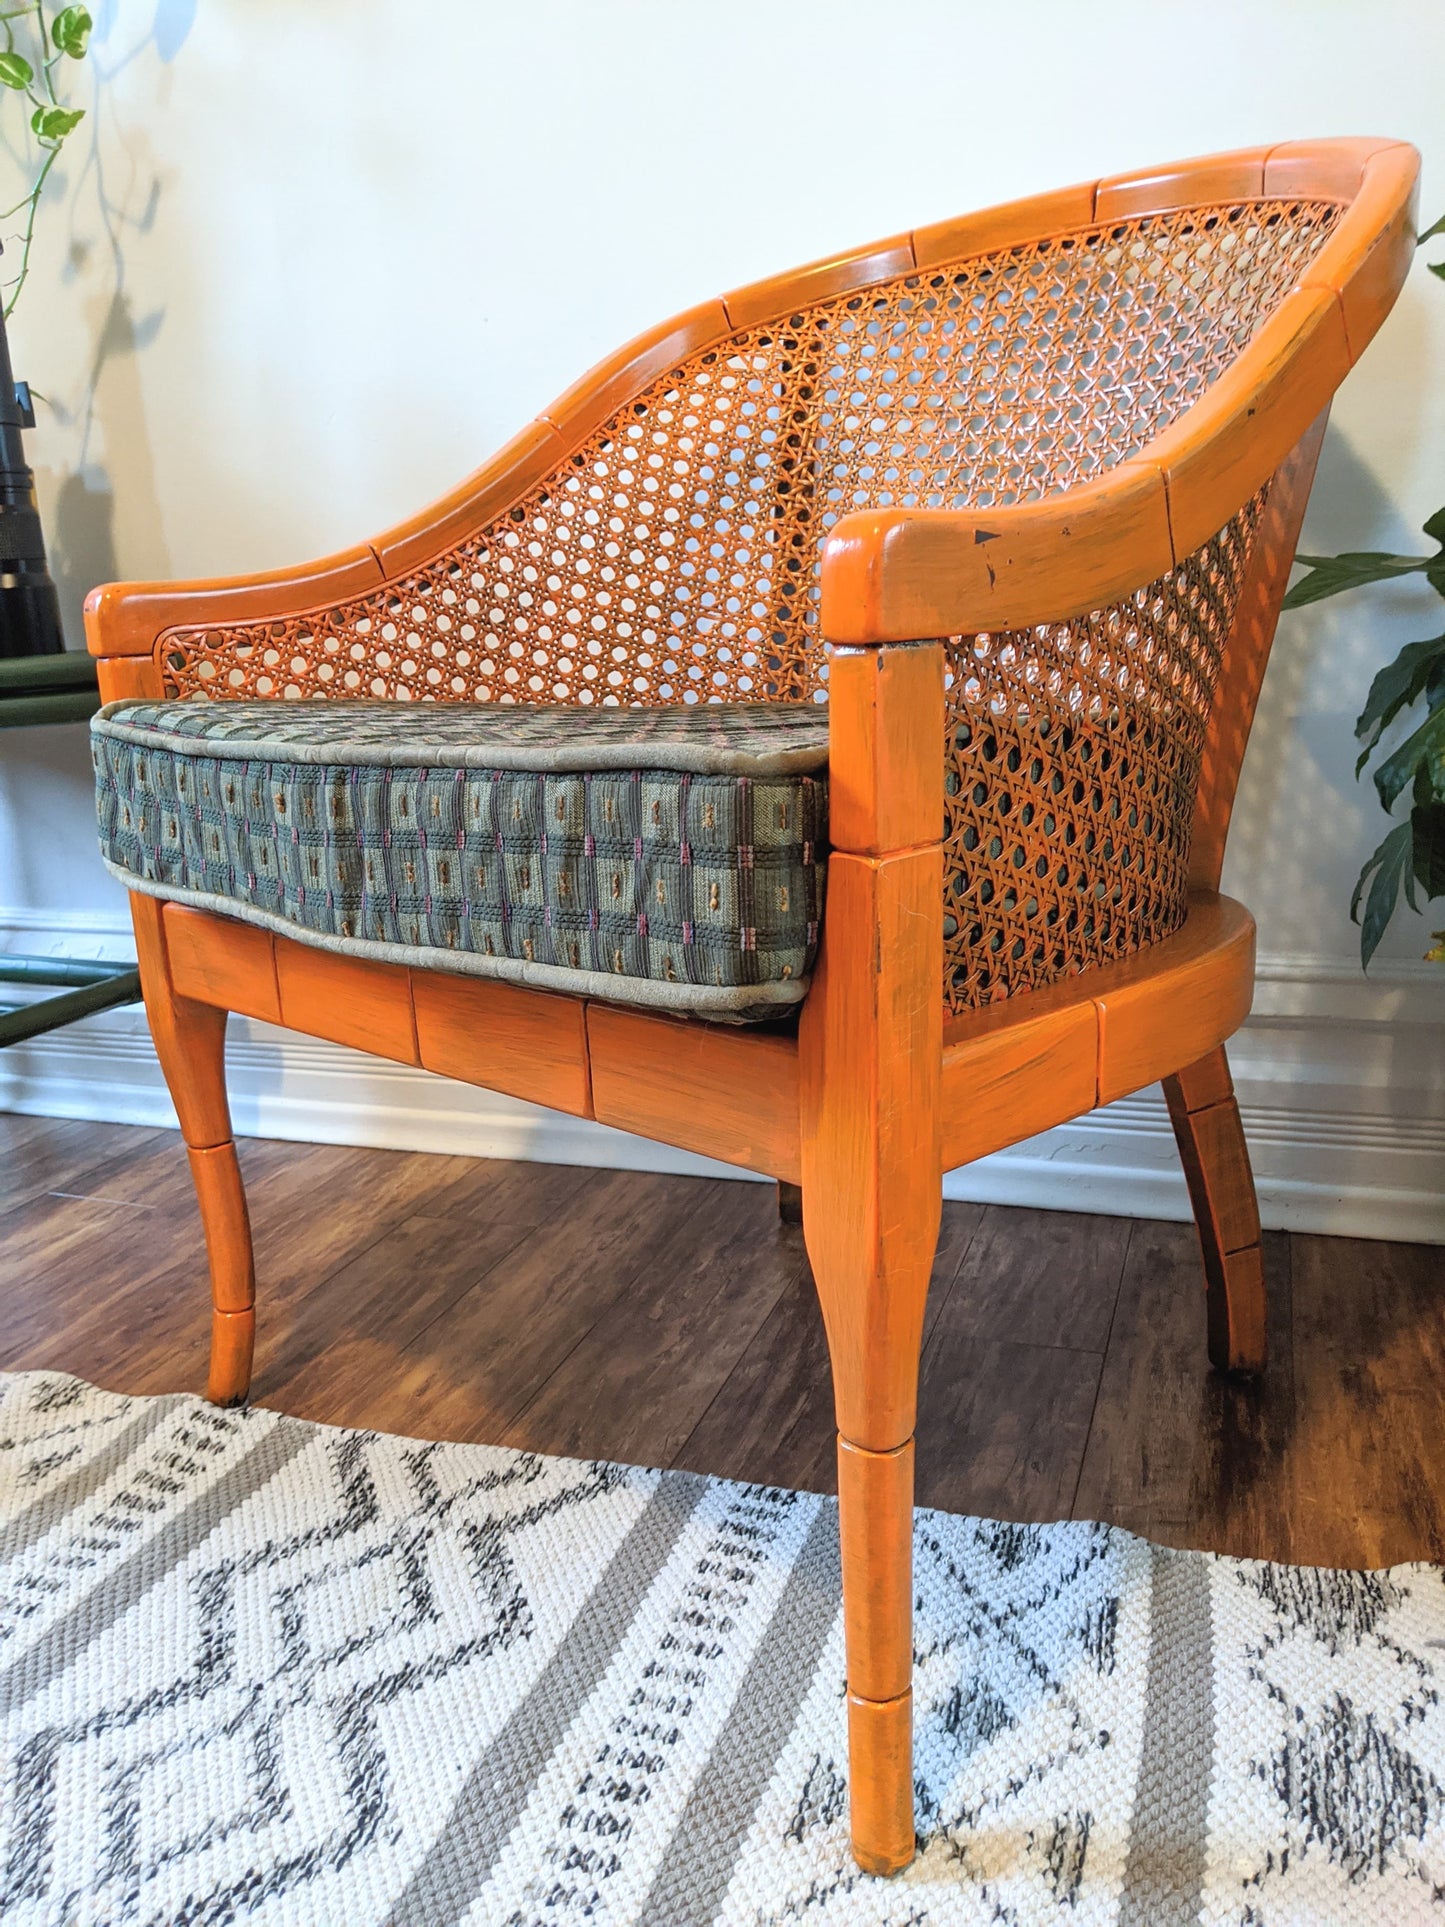 The Orange Bigsby Chair